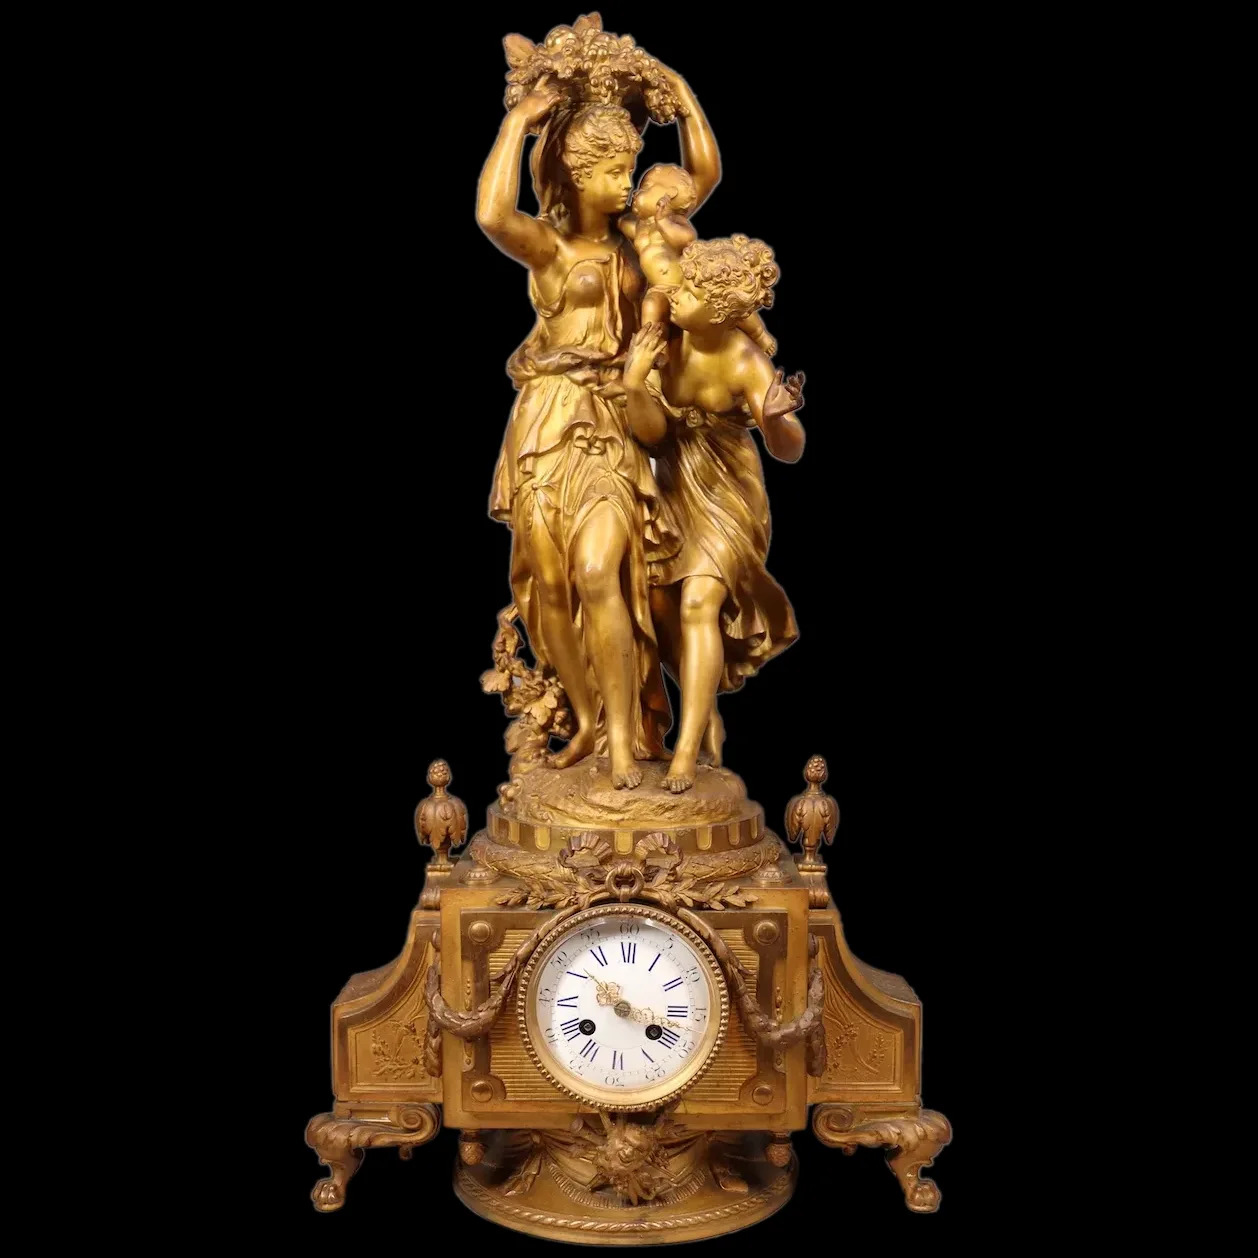 Antique French Louis XVI Style Gilded Alloy Table/Mantle Clock - 19th Century